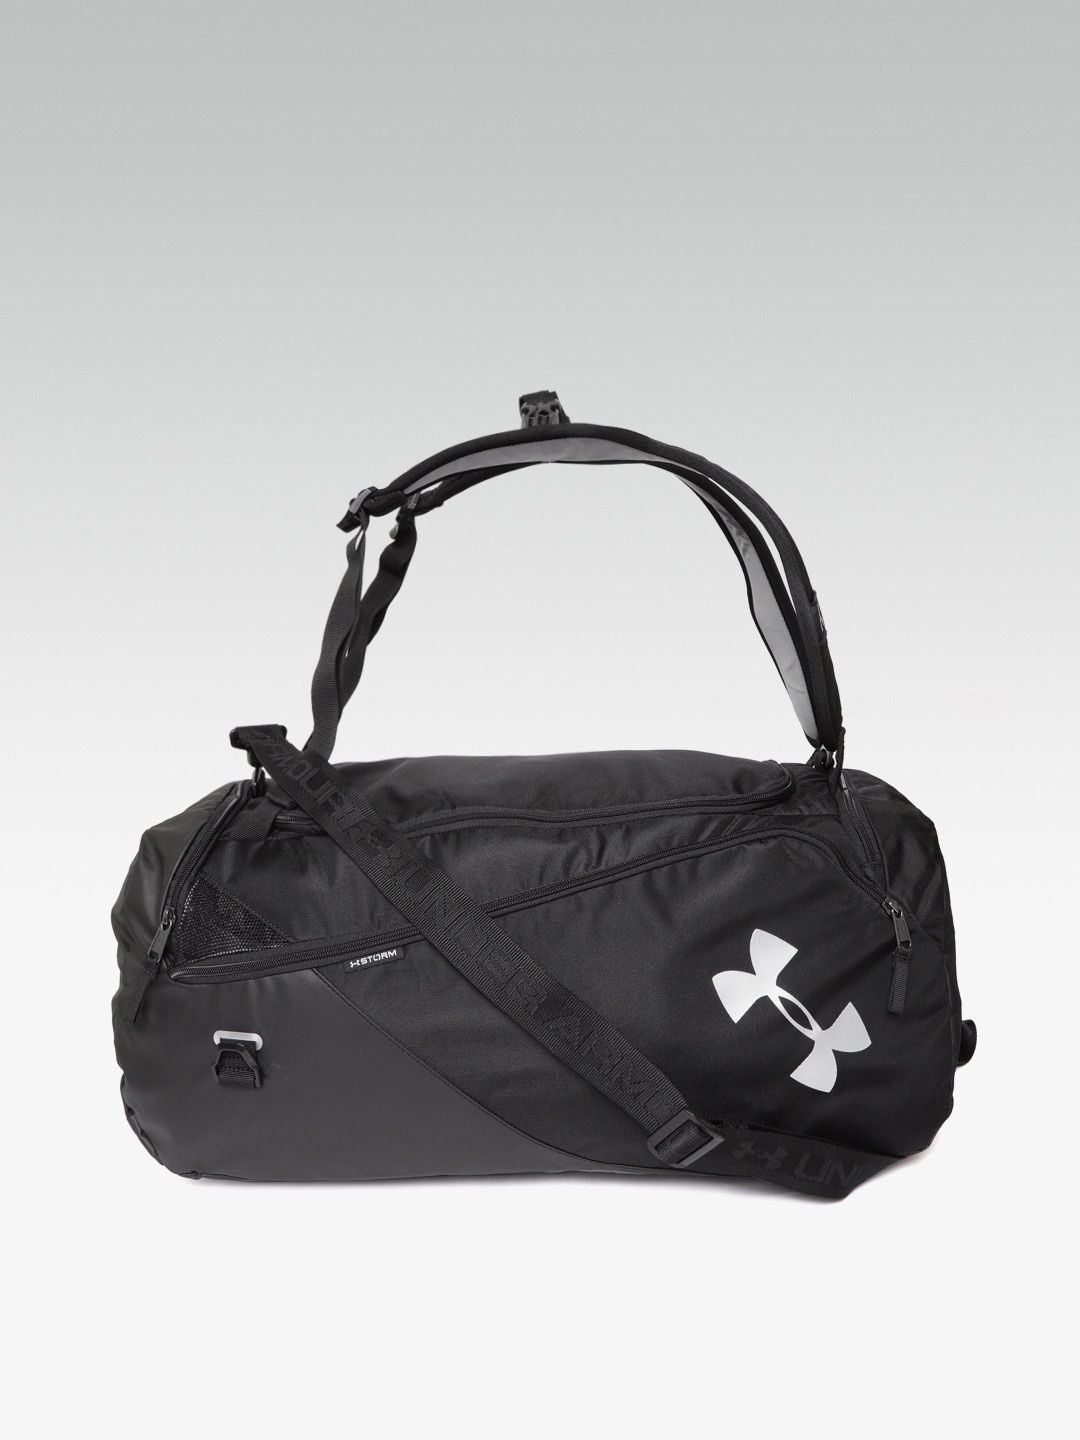 Under Armour Undeniable Sackpack Review  YouTube